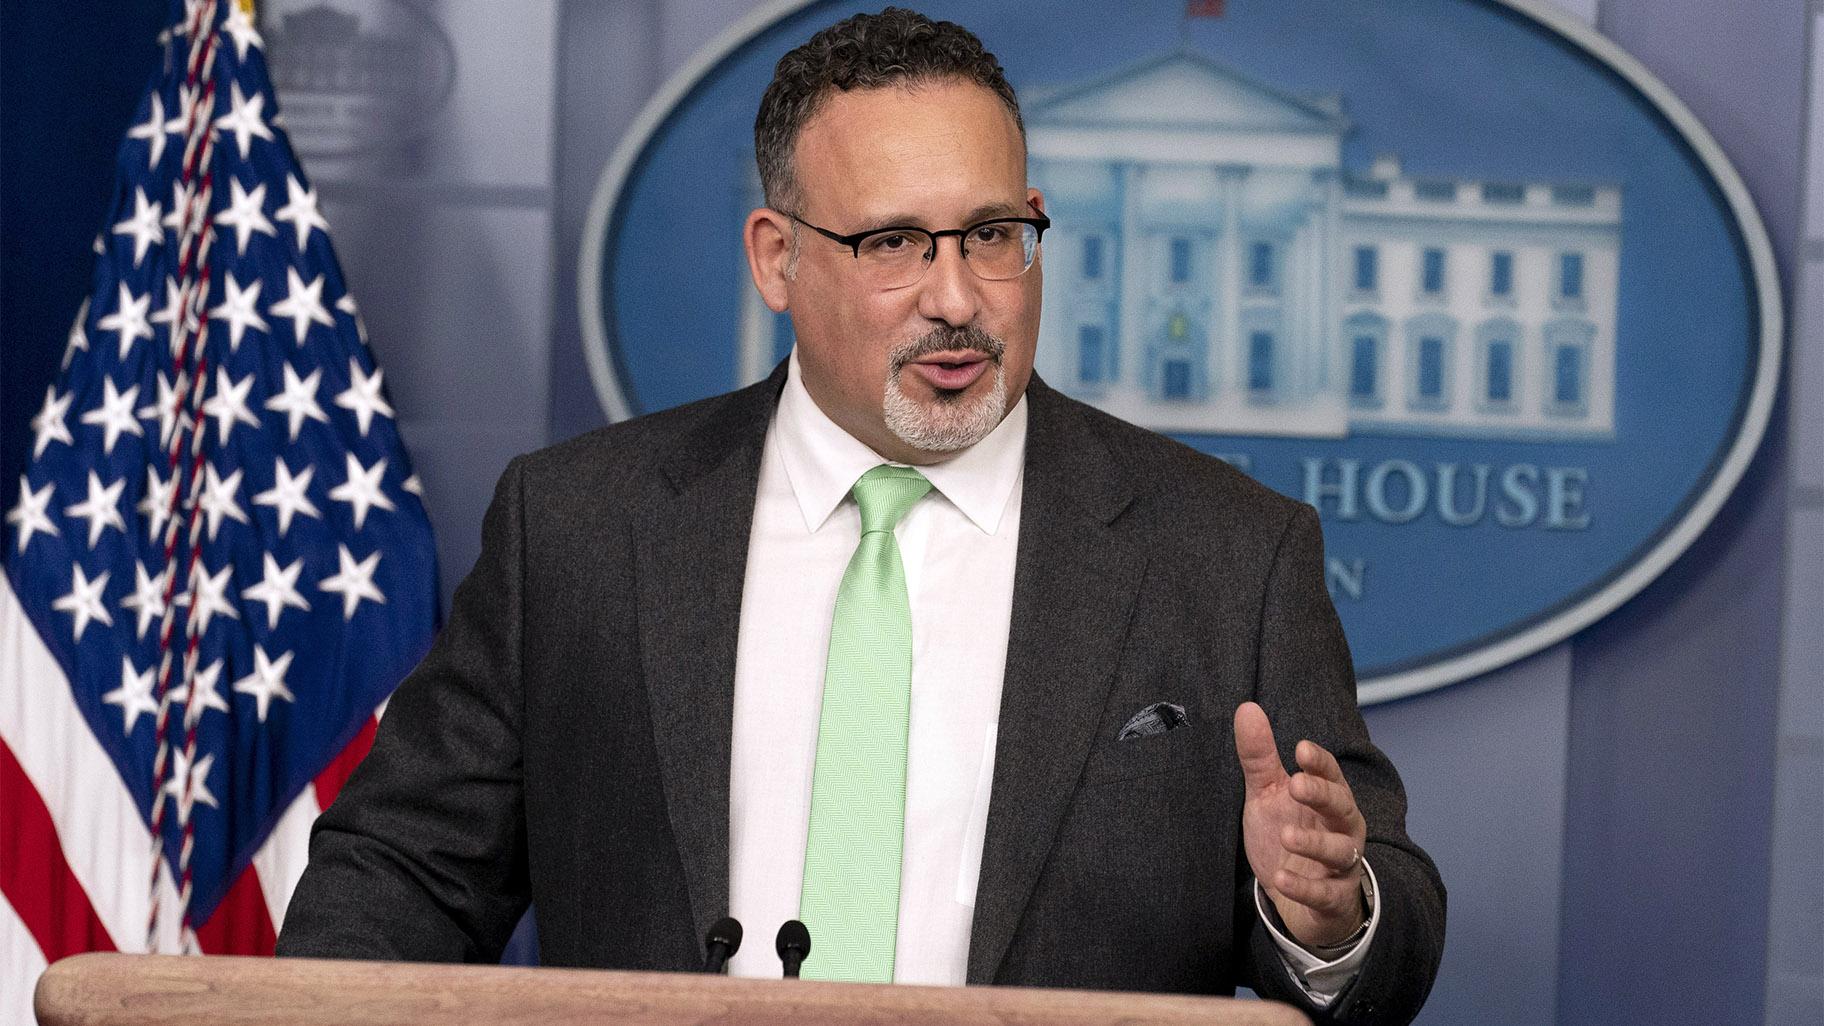 FILE - In this March 17, 2021, file photo, Education Secretary Miguel Cardona speaks during a press briefing at the White House in Washington. (AP Photo / Andrew Harnik, File)